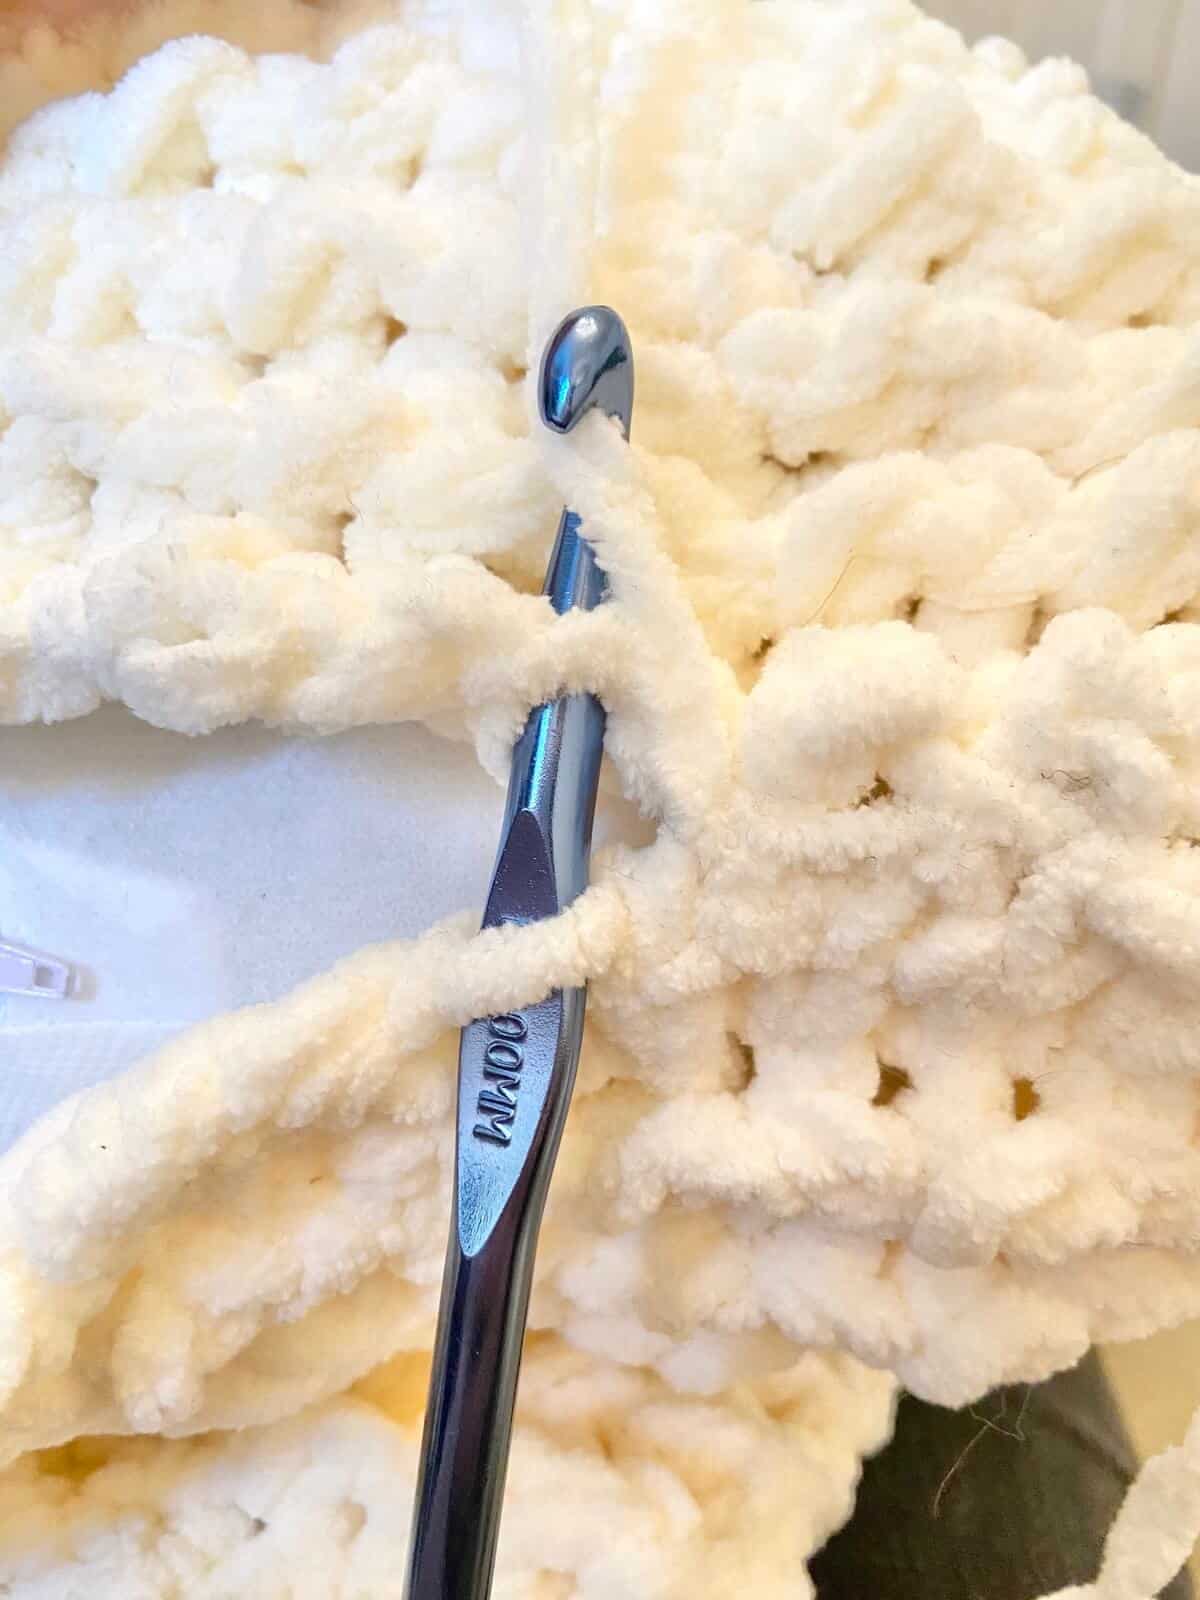 Stitching two sides together with crochet hook and yarn.